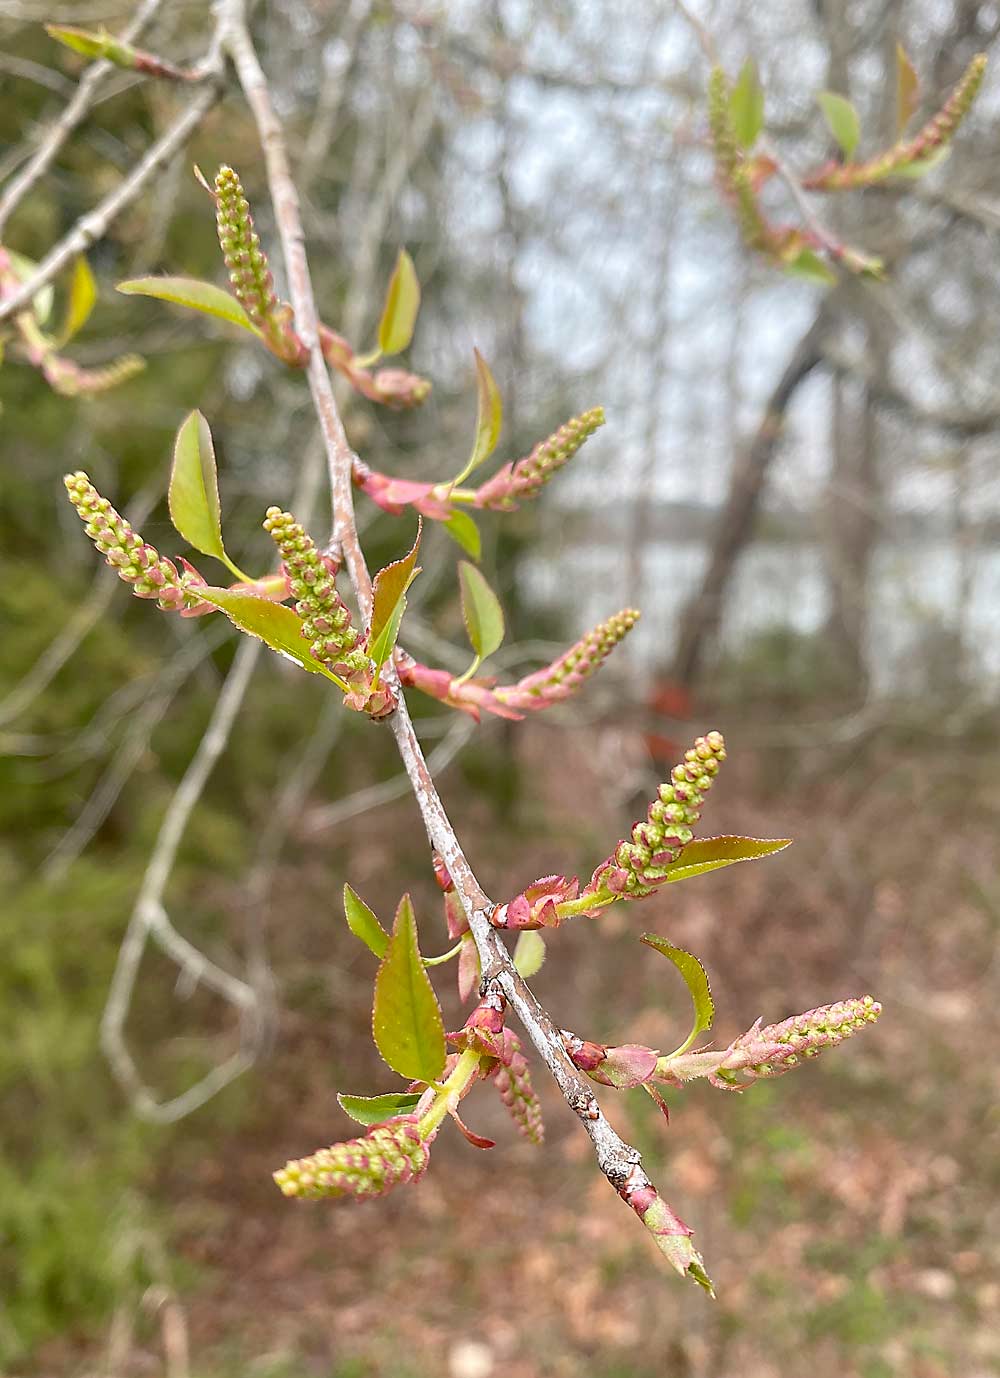 Wild cherry (Prunus serotina) blooming at the Clemson Musser Fruit Research Farm. Wild cherry trees are possible sources of virus inoculum that spreads to commercial peach orchards. (Courtesy Elizabeth Cieniewicz/Clemson University)